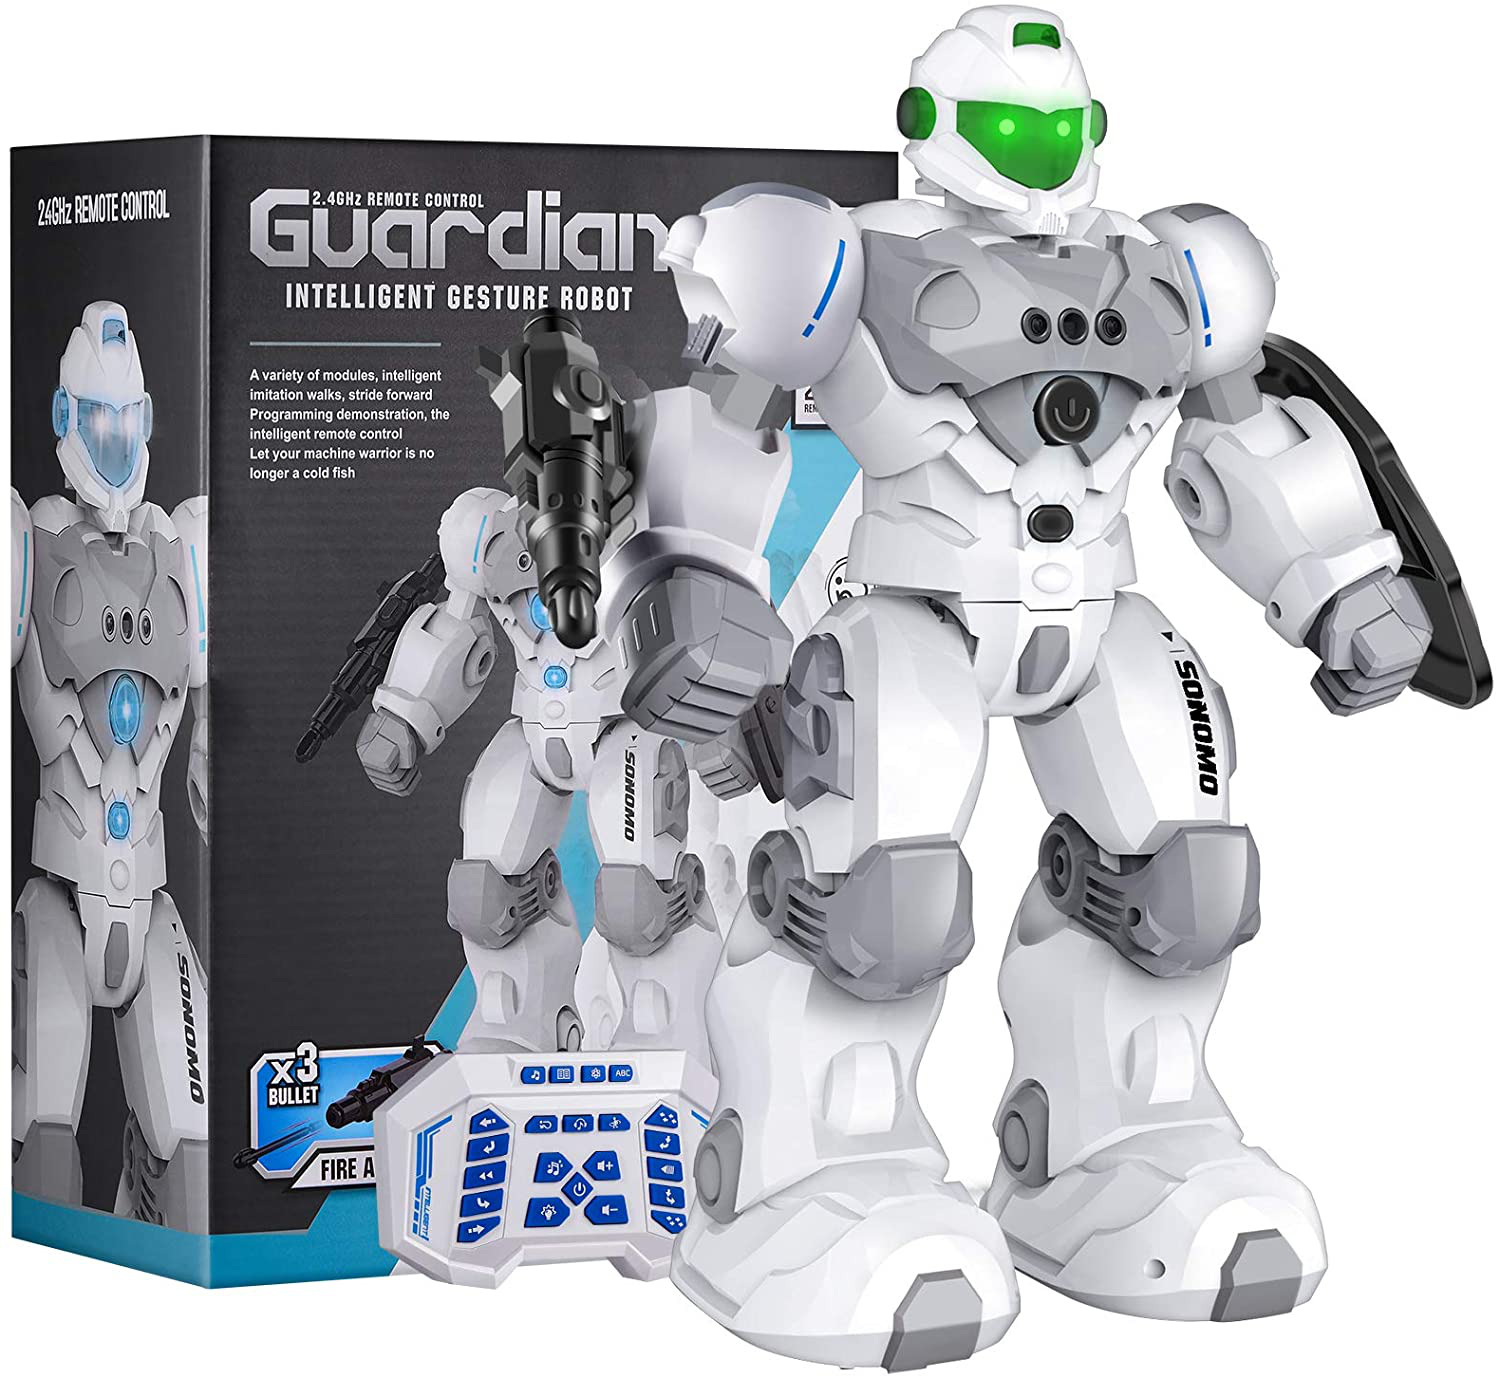 Sonomo Toys for 6-9 Year Old Boys, RC Robot Gifts for Kids Intelligent Programma